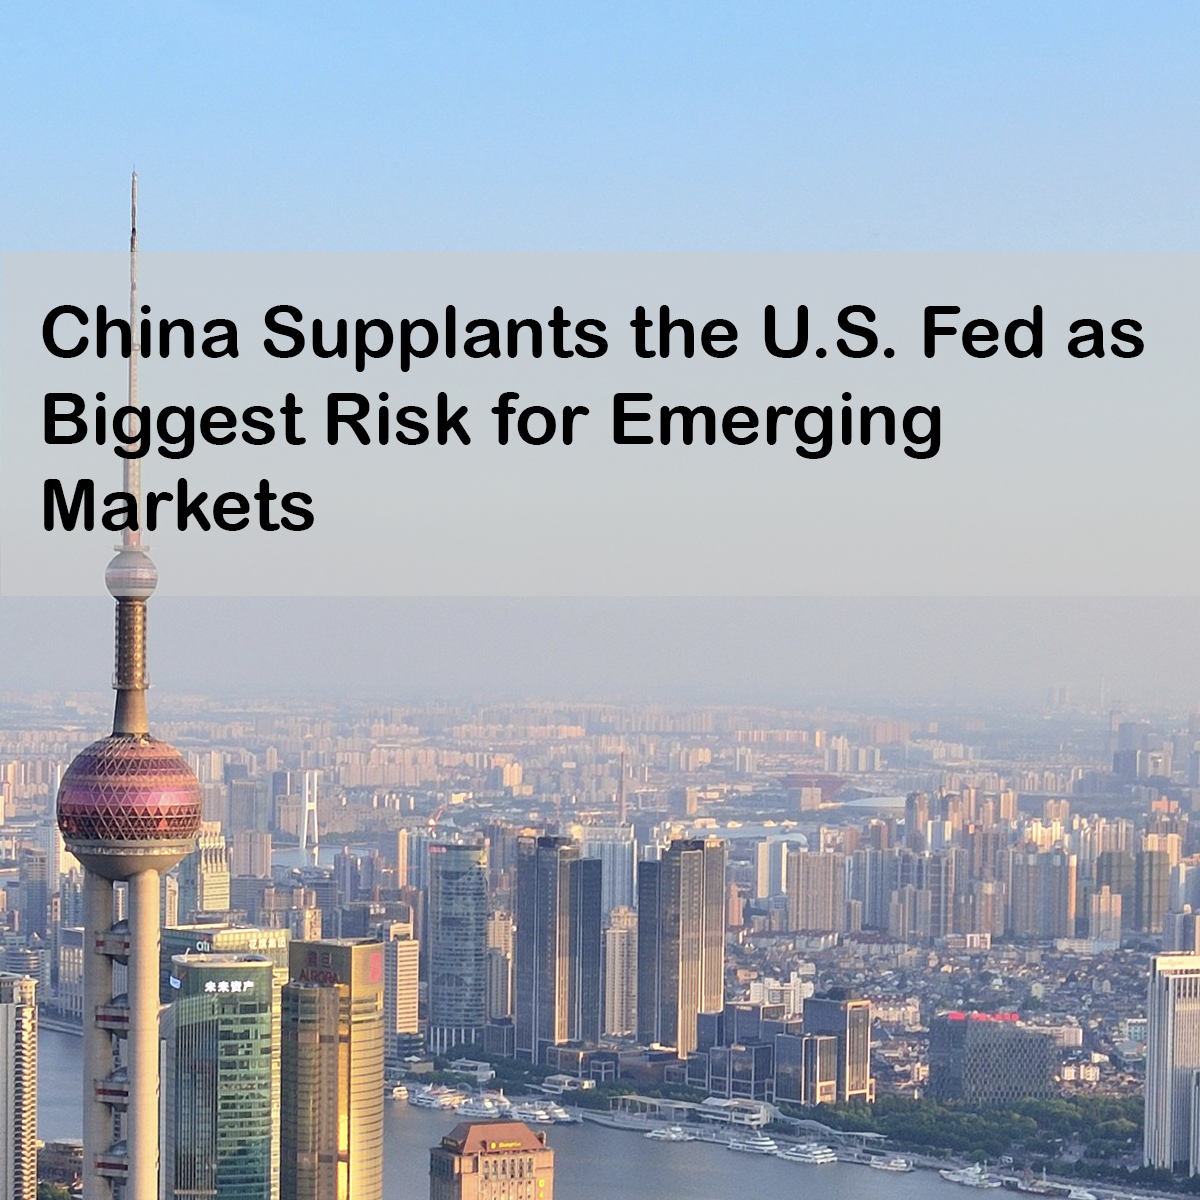 China Supplants the U.S. Fed as Biggest Risk for Emerging Markets